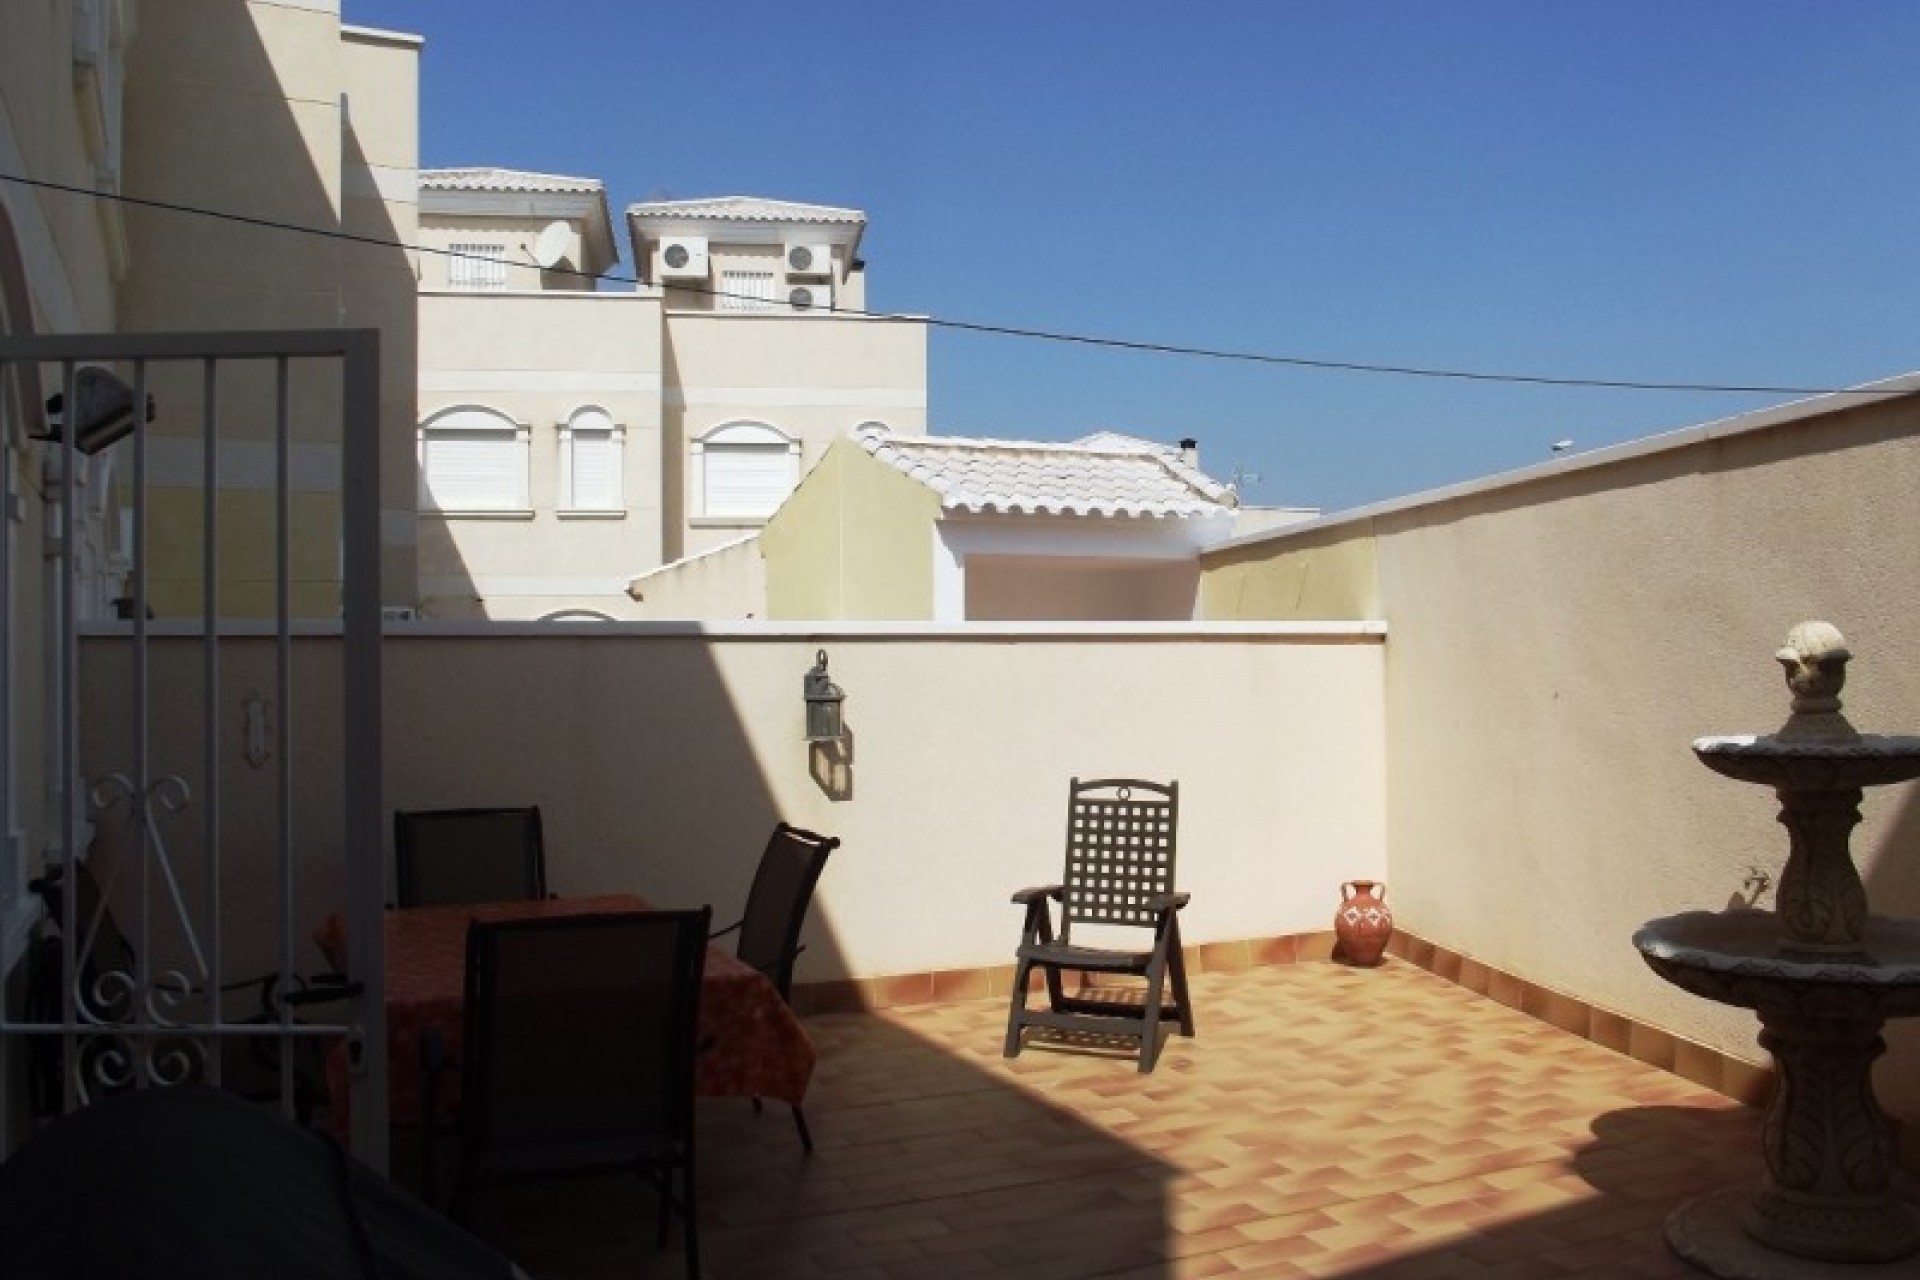 Cheap bargain property for sale, cheapbargain property in Heredades near Torrevieja and Guardamar, Costa Blanca cheap.